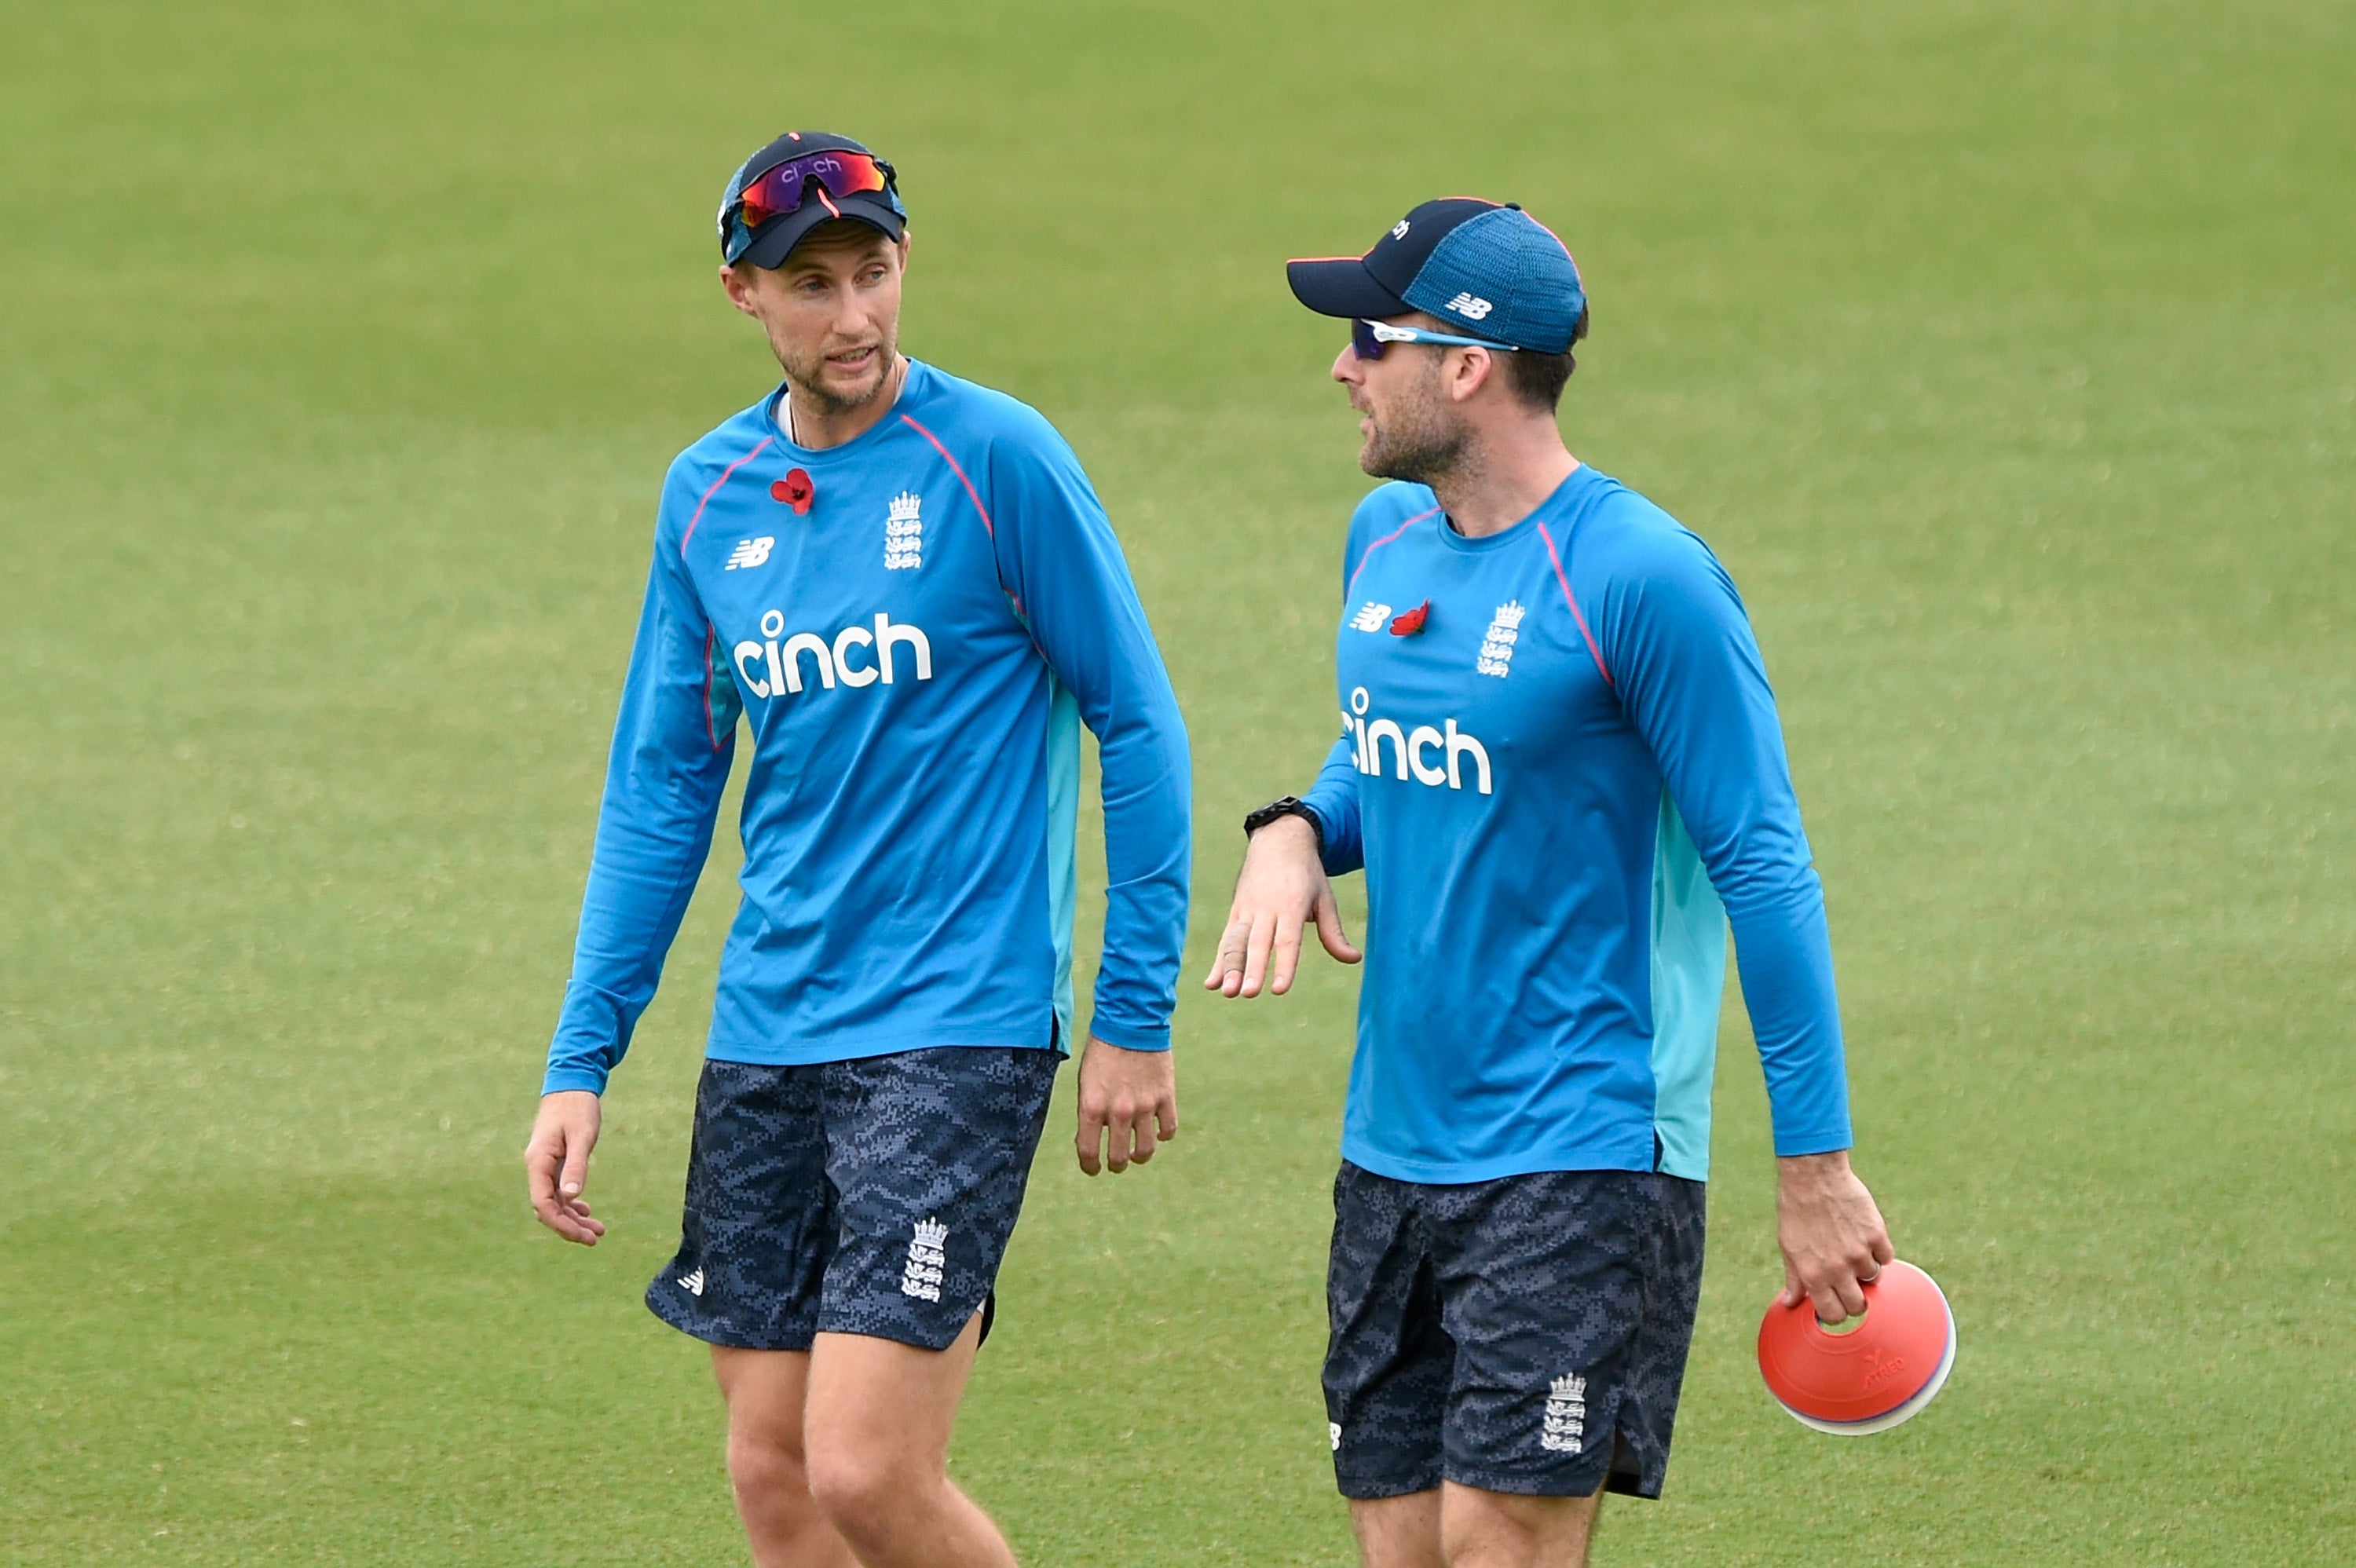 England captain Joe Root trains ahead of the Ashes in Australia on 11 November, 2021.